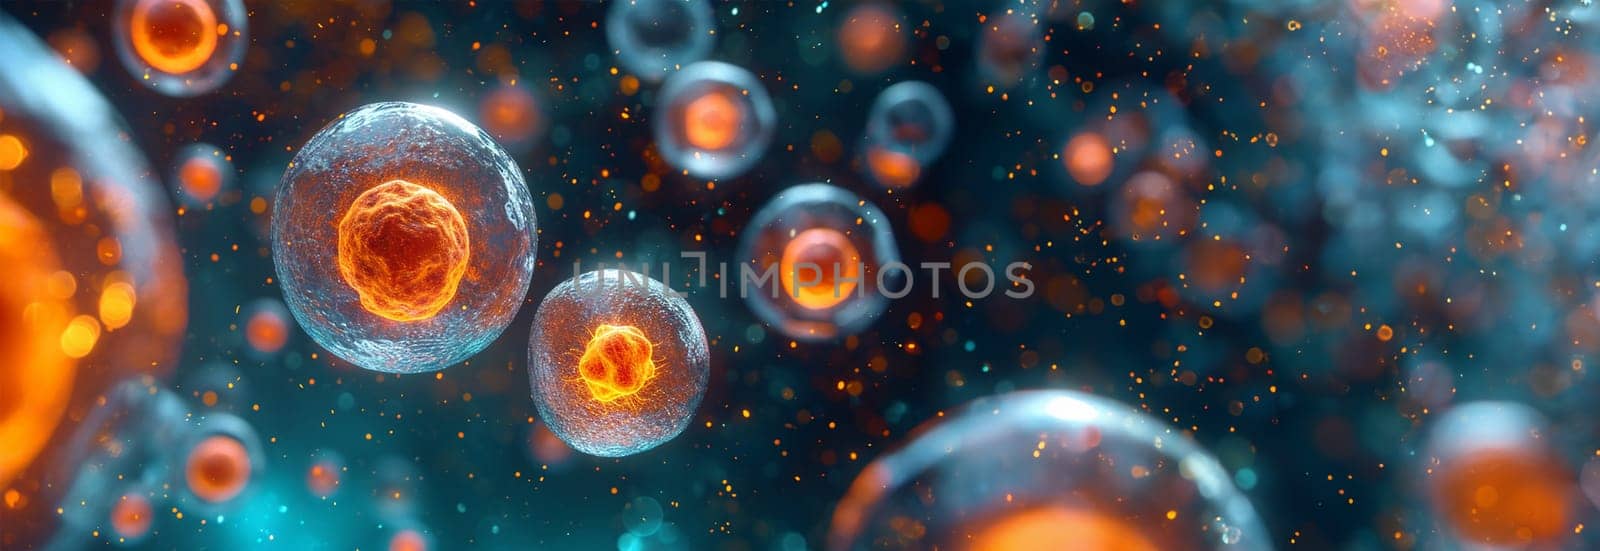 3d rendering of Human cell or Embryonic stem cell microscope background. medical microscopic molecular biology background. DNA colorful background by Annebel146